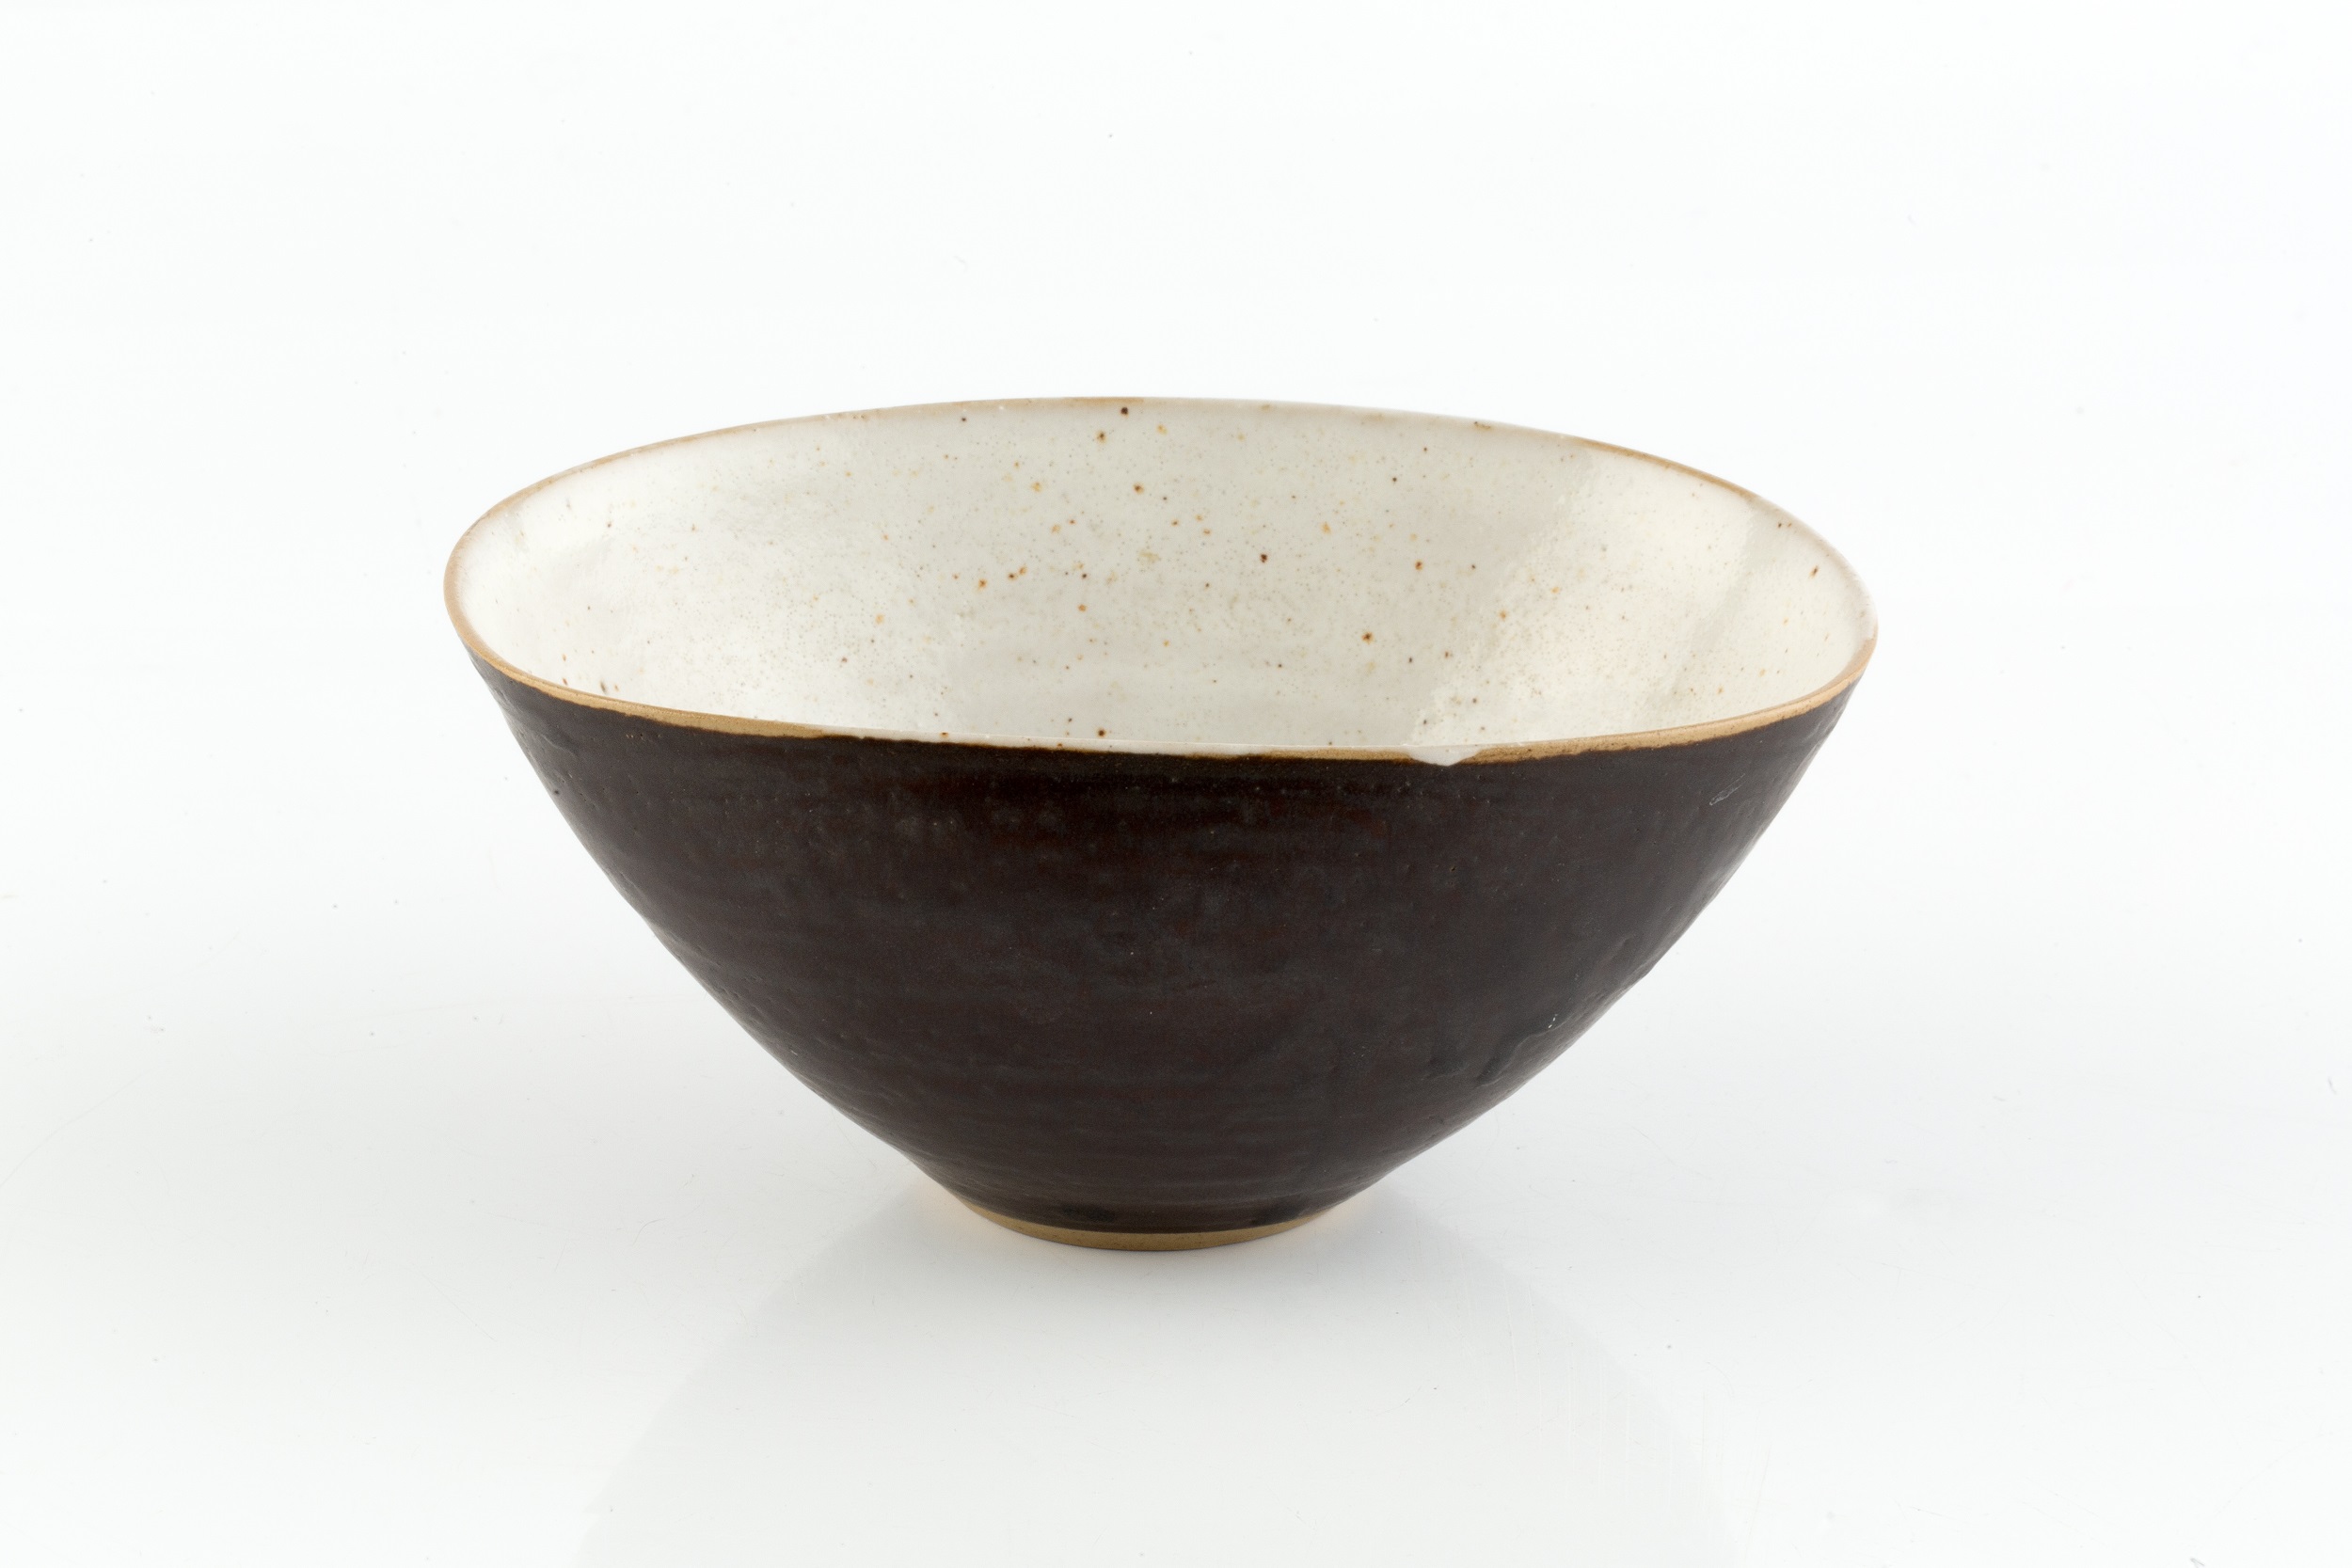 Lucie Rie (1902-1995) Squared bowl manganese glaze impressed potter's seal 7.6cm high, 15.8cm wide. - Image 2 of 6